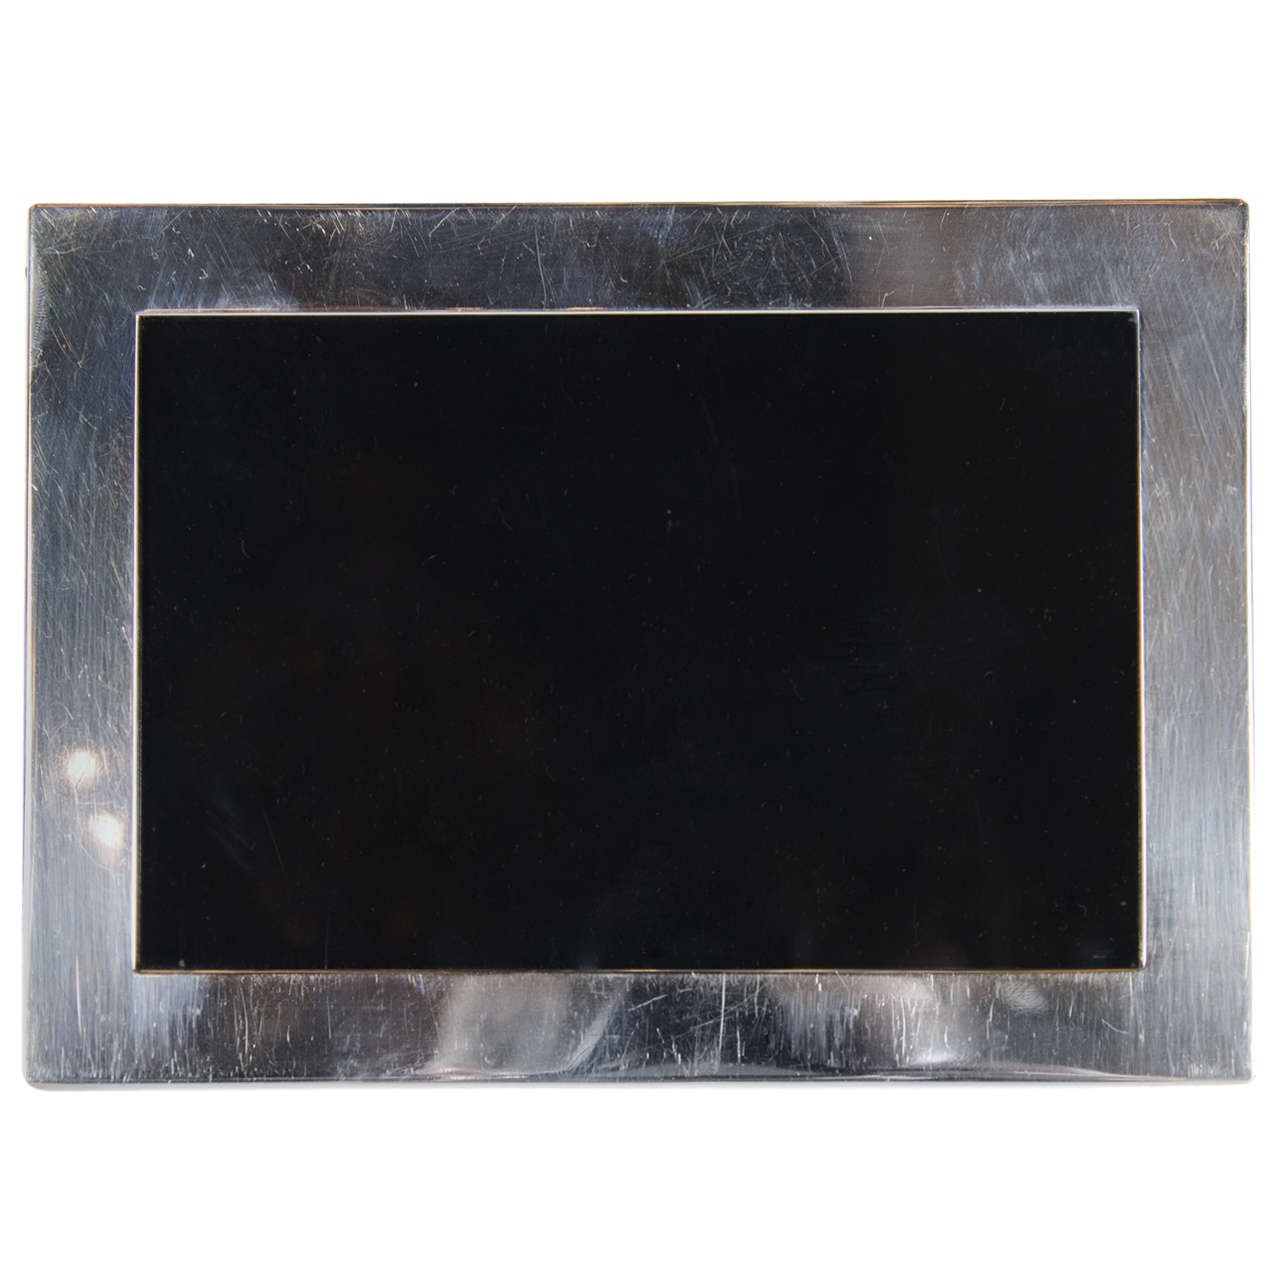 Sophisticated Mid-Century Modern Sterling Silver Picture Frame by Tiffany & Co